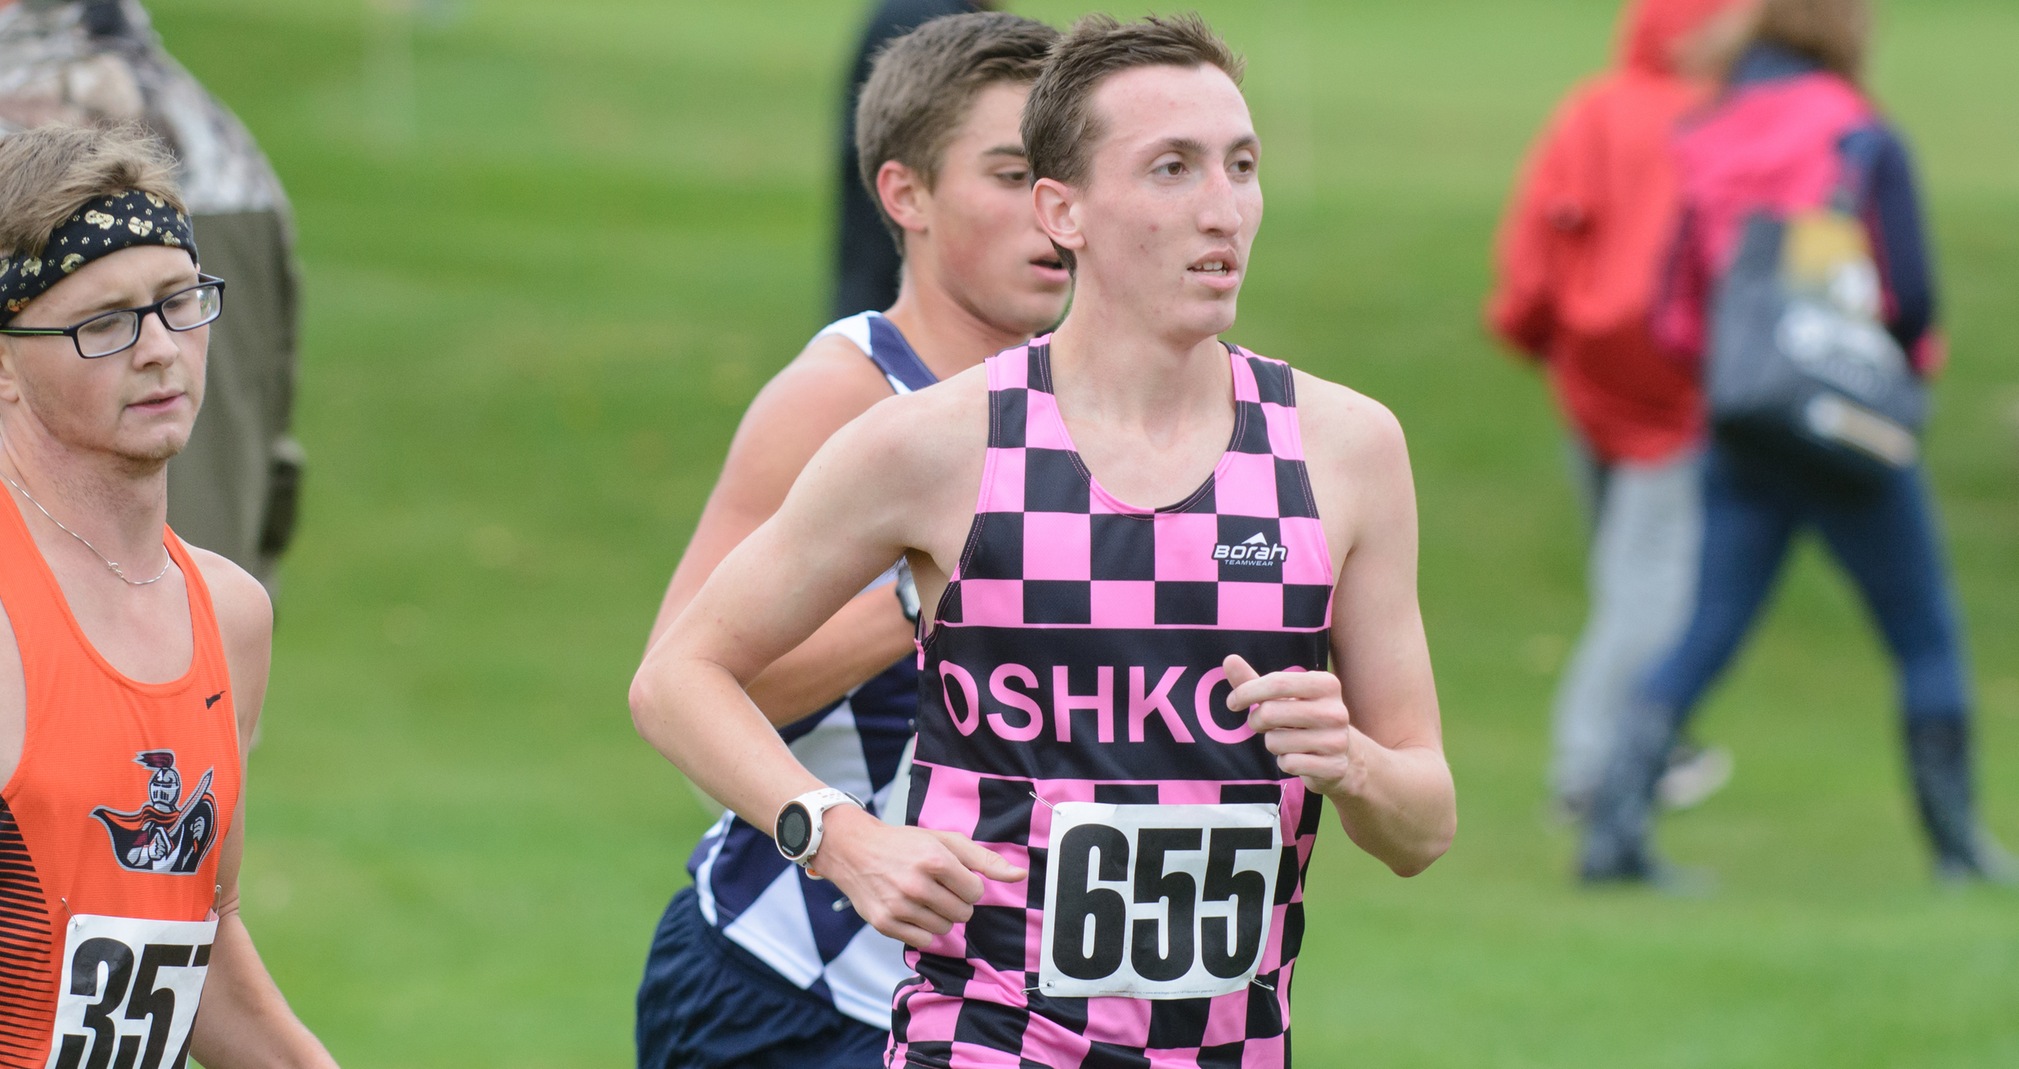 Brian McKnight finished fifth for UW-Oshkosh and 66th among the meet's 263 runners.